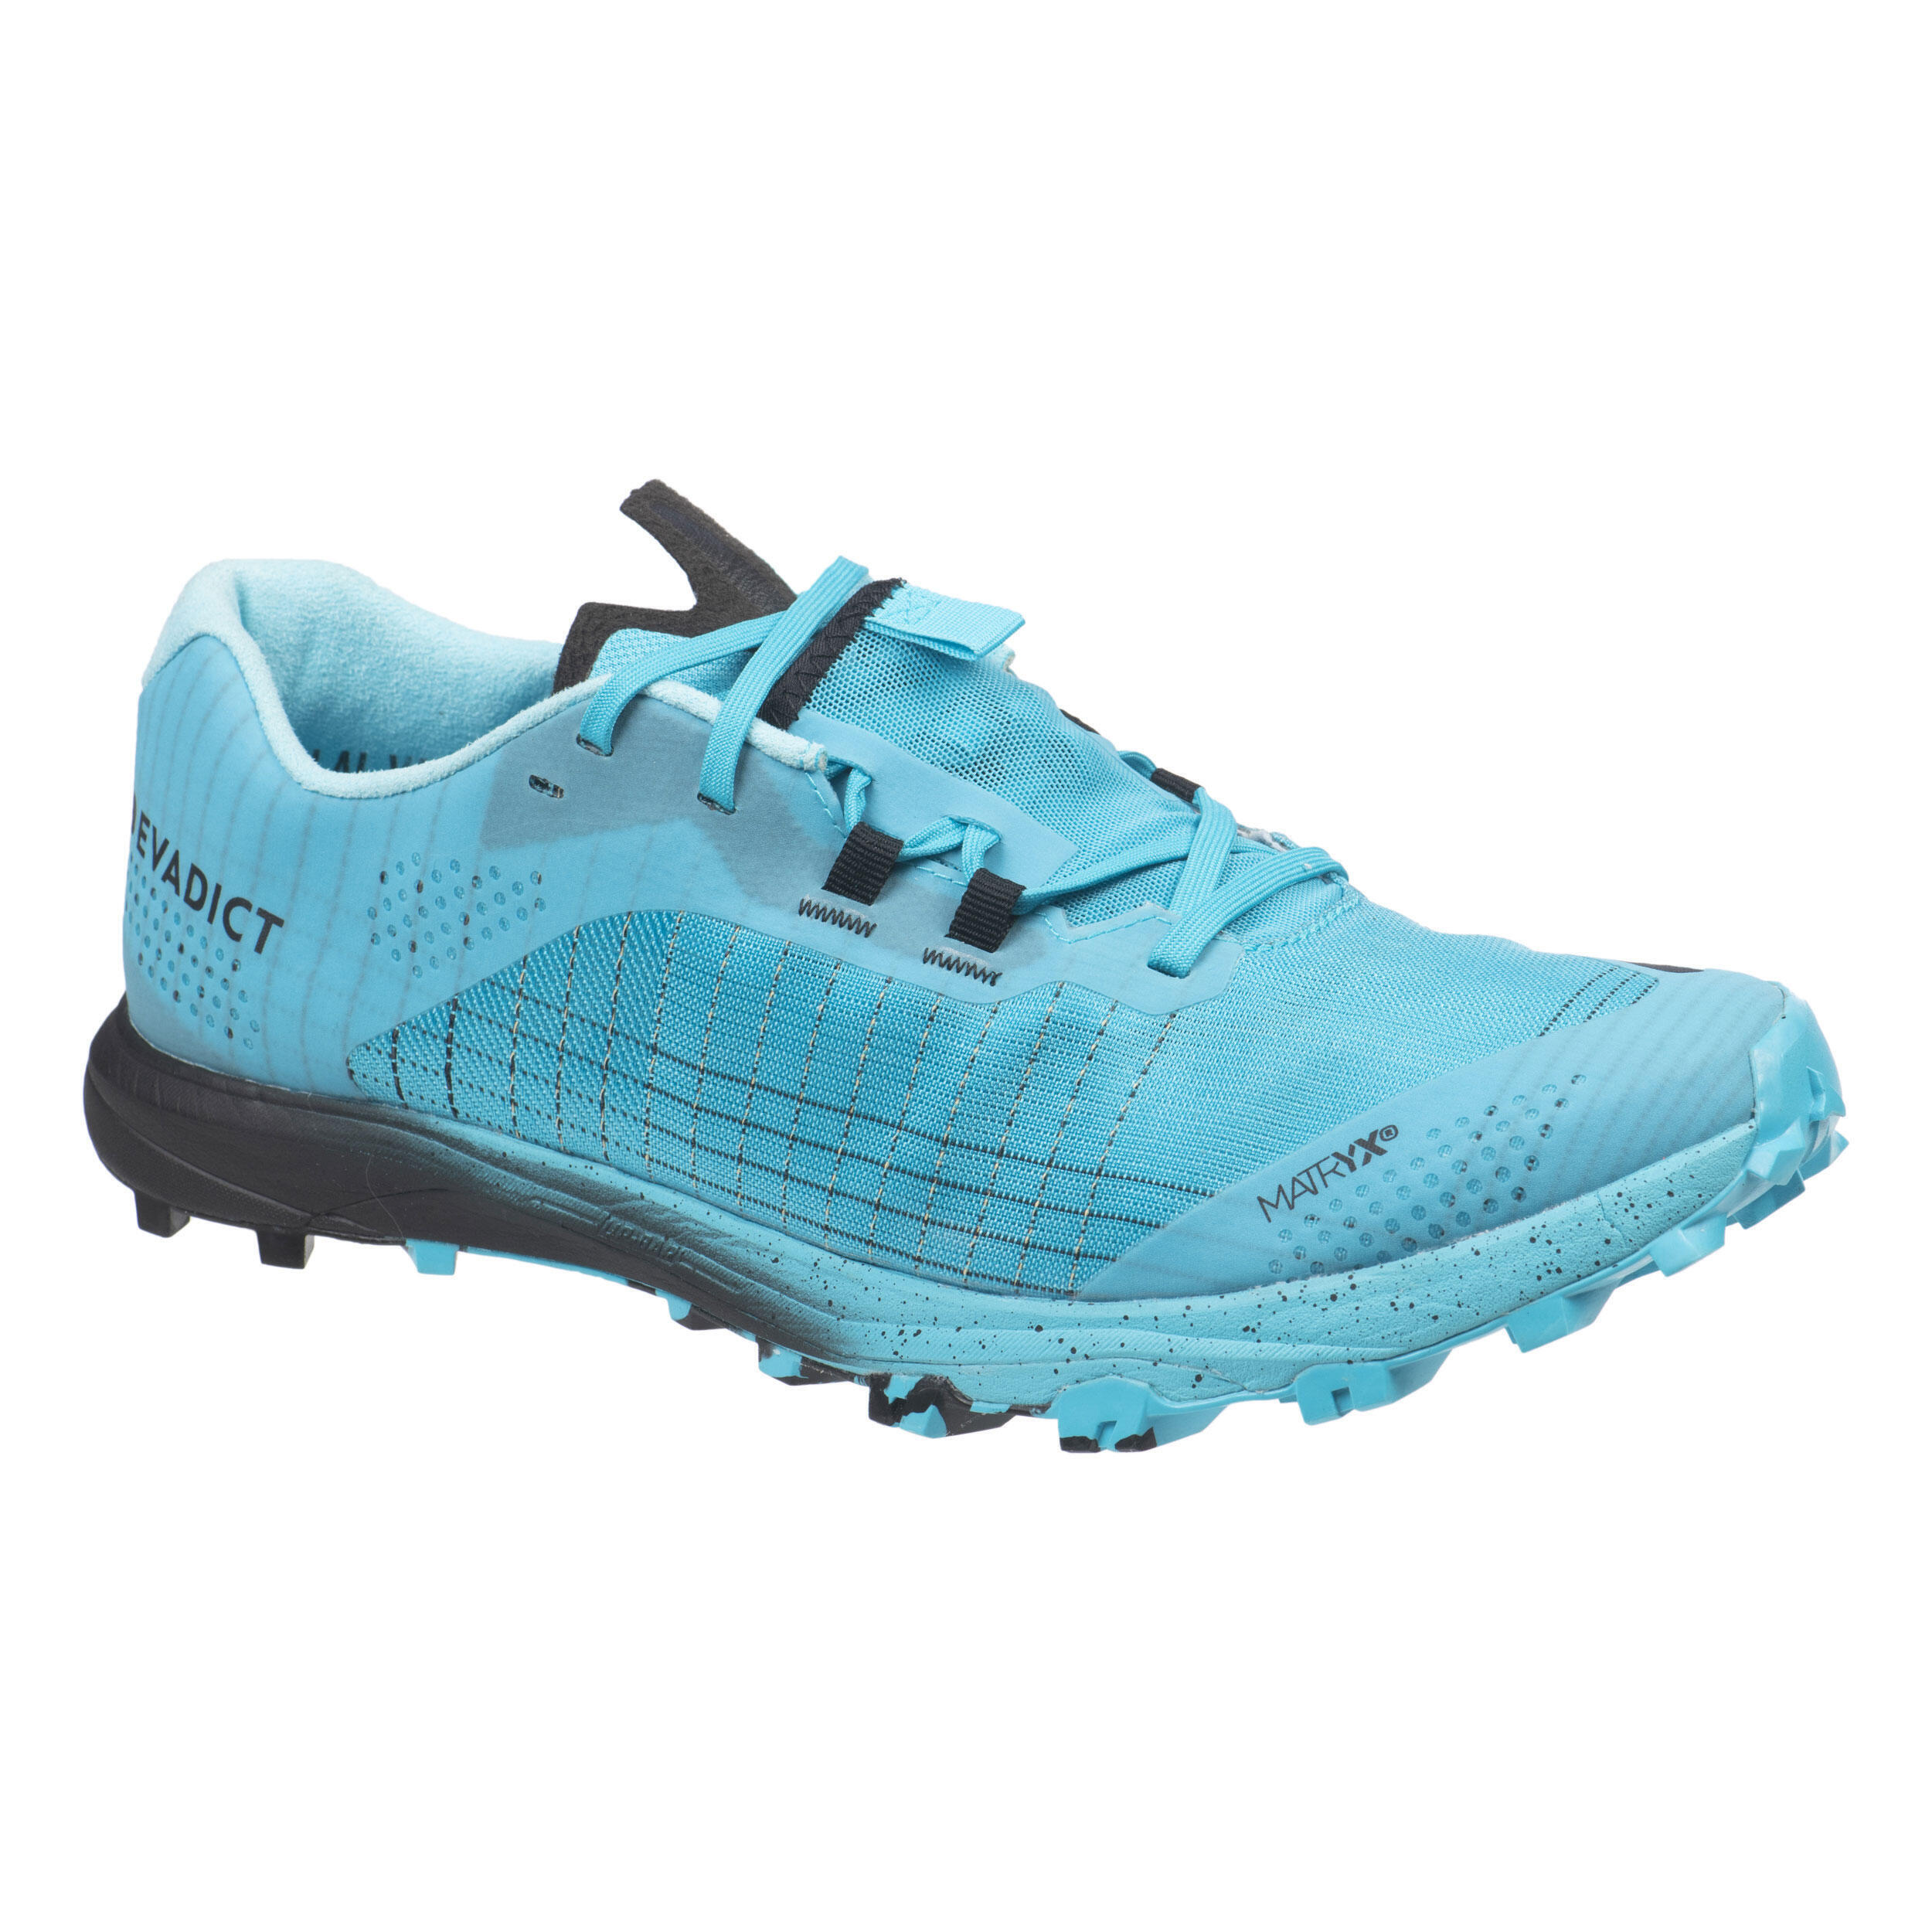 Race Light Men's Trail Running Shoes - sky blue and black 1/15